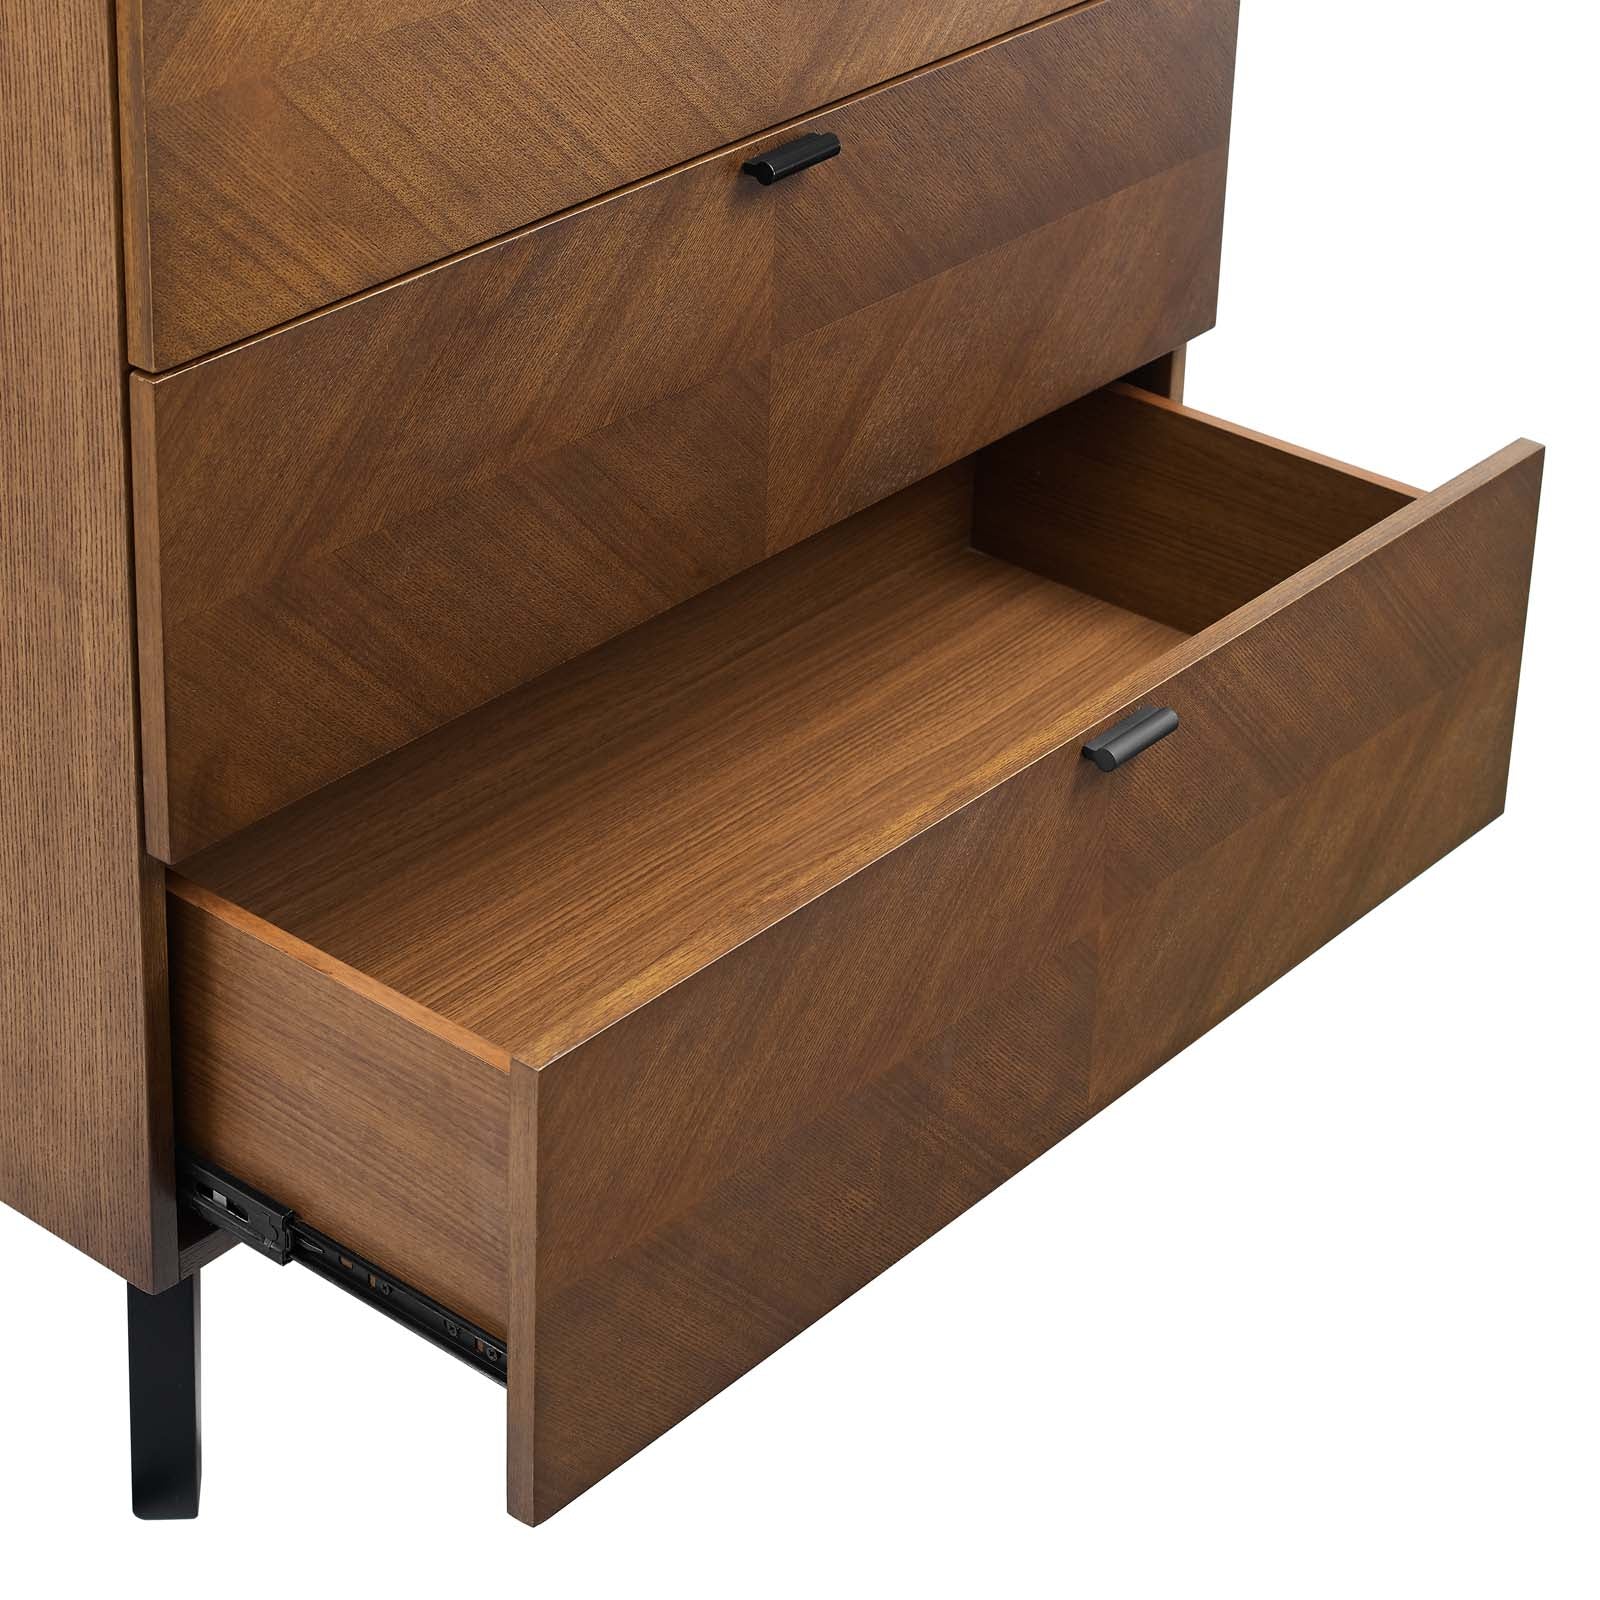 Kali Wood Chest-Chest-Modway-Wall2Wall Furnishings